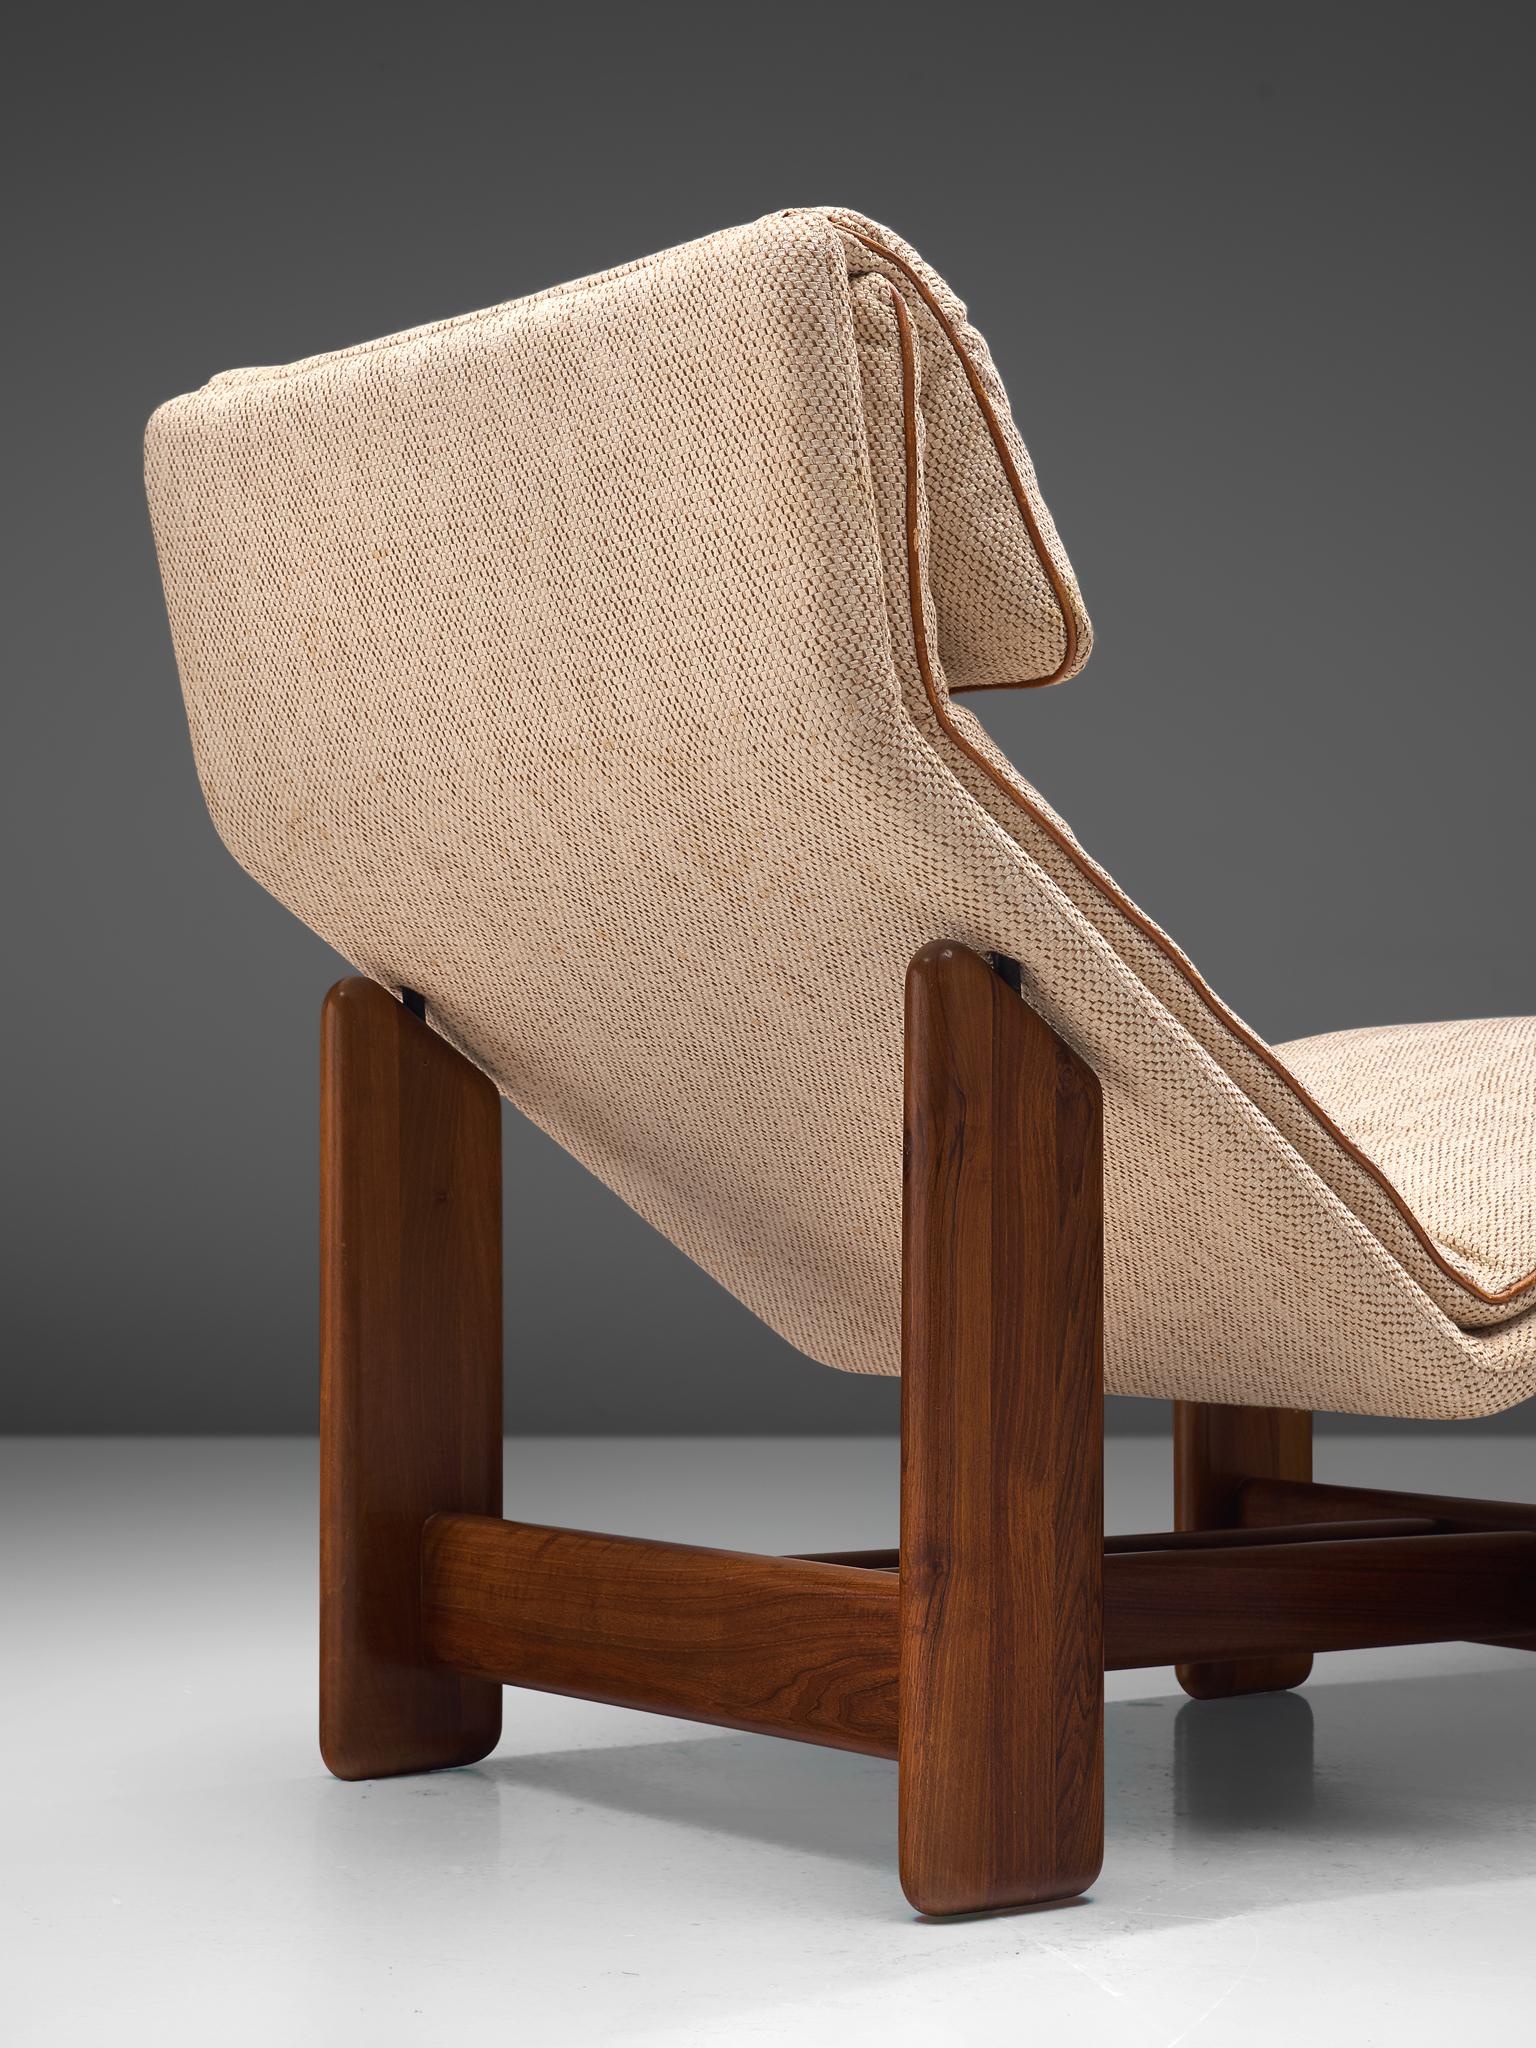 Italian Chaise Longue in Beige Fabric and Walnut by Mobil Girgi 1